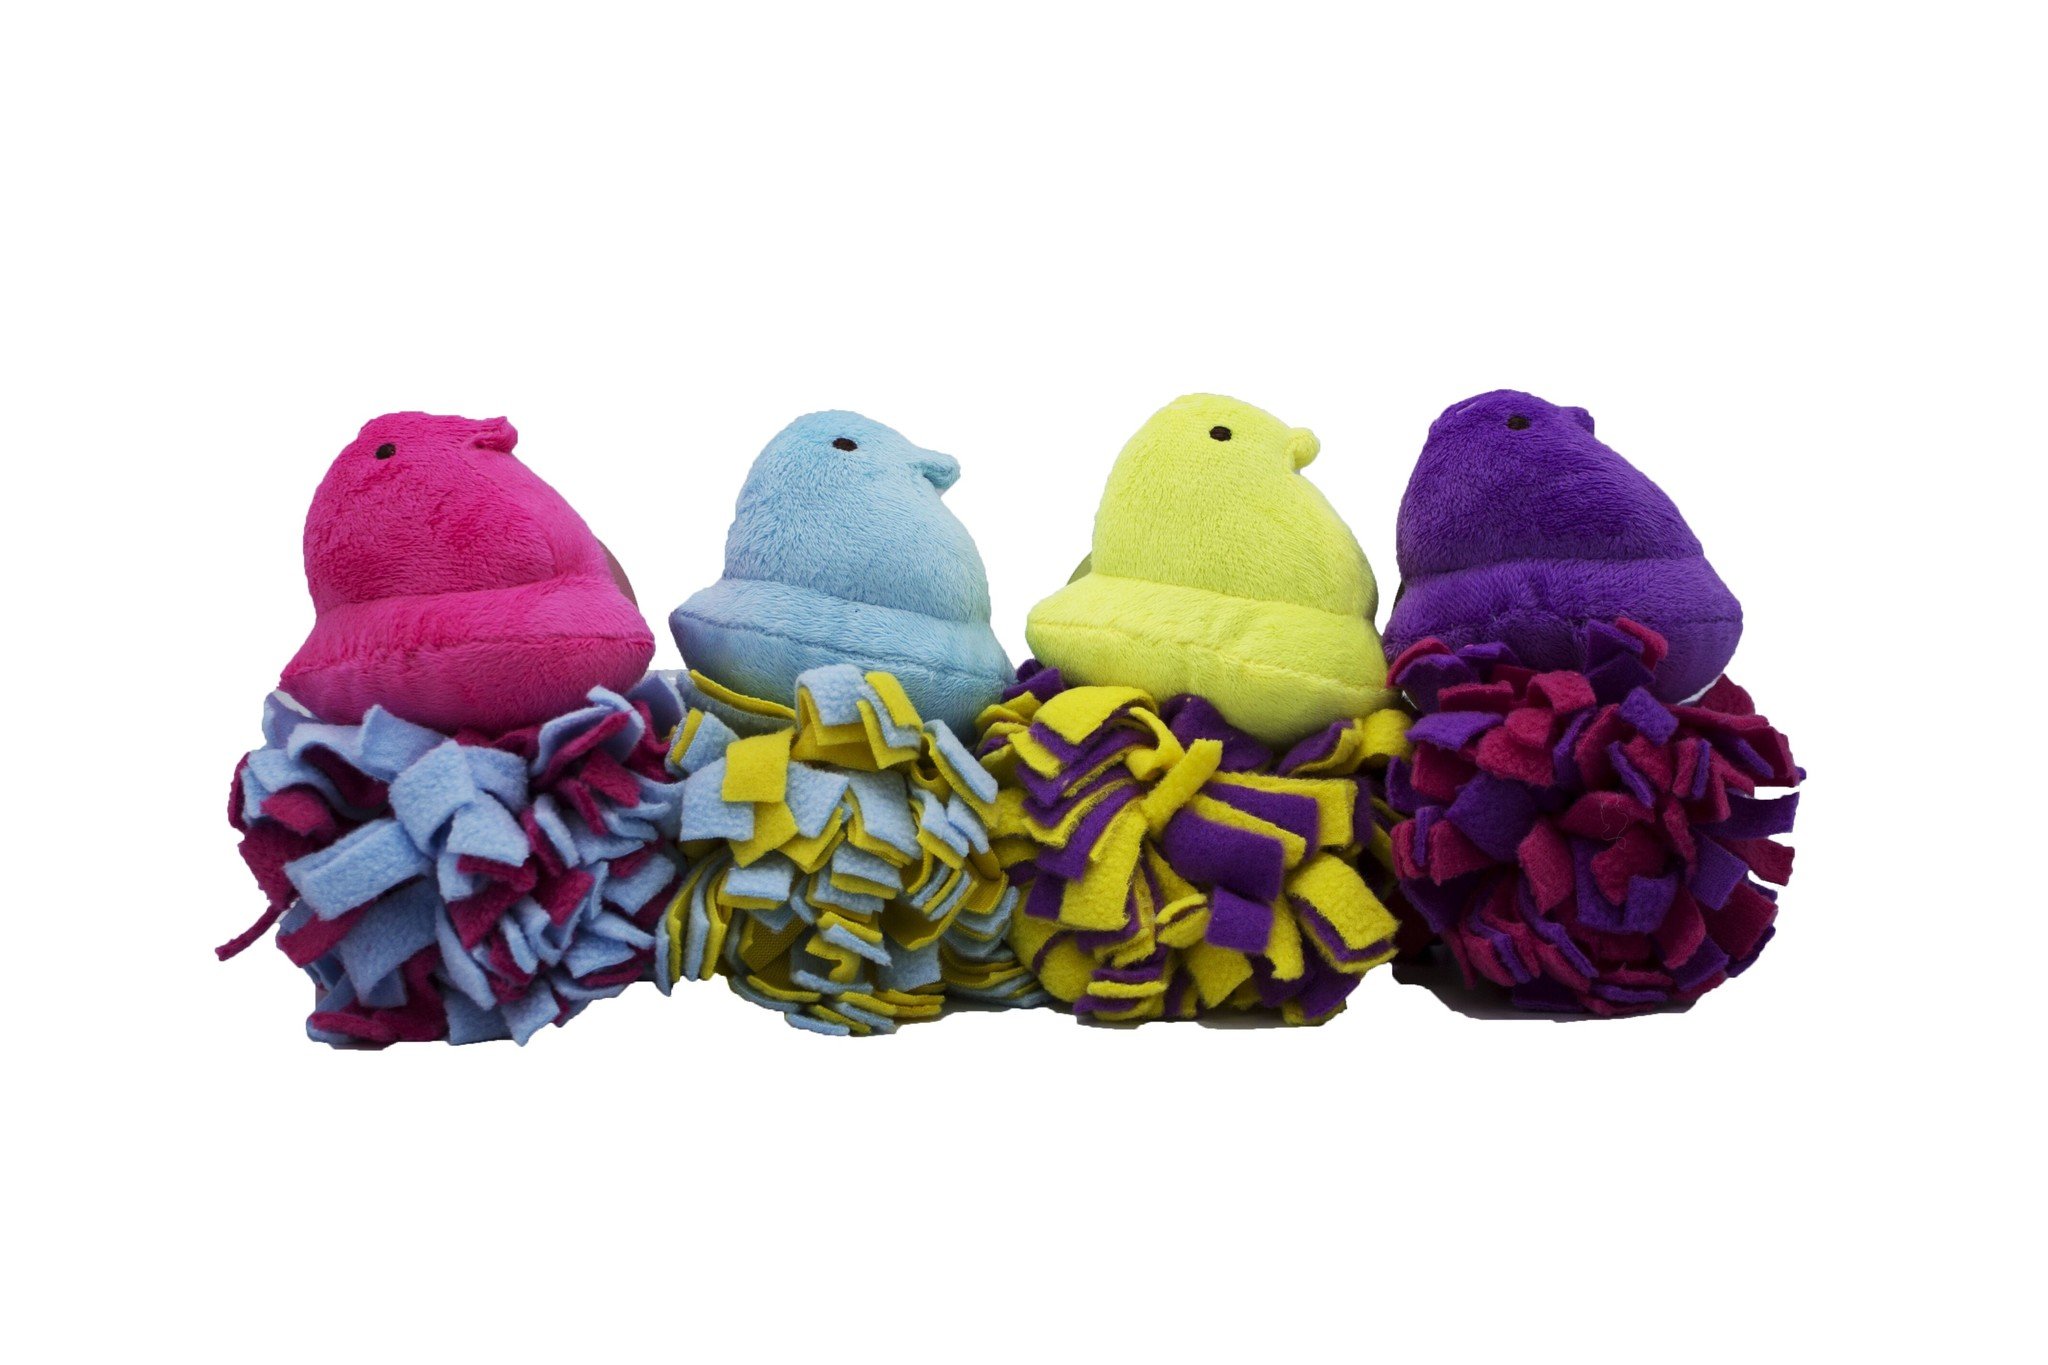 Fetch For Pets Peeps Chick Toy Fleece Bottom Plush Asst Colors, Pet Food  and Supplies Store in Lake Mary, FL